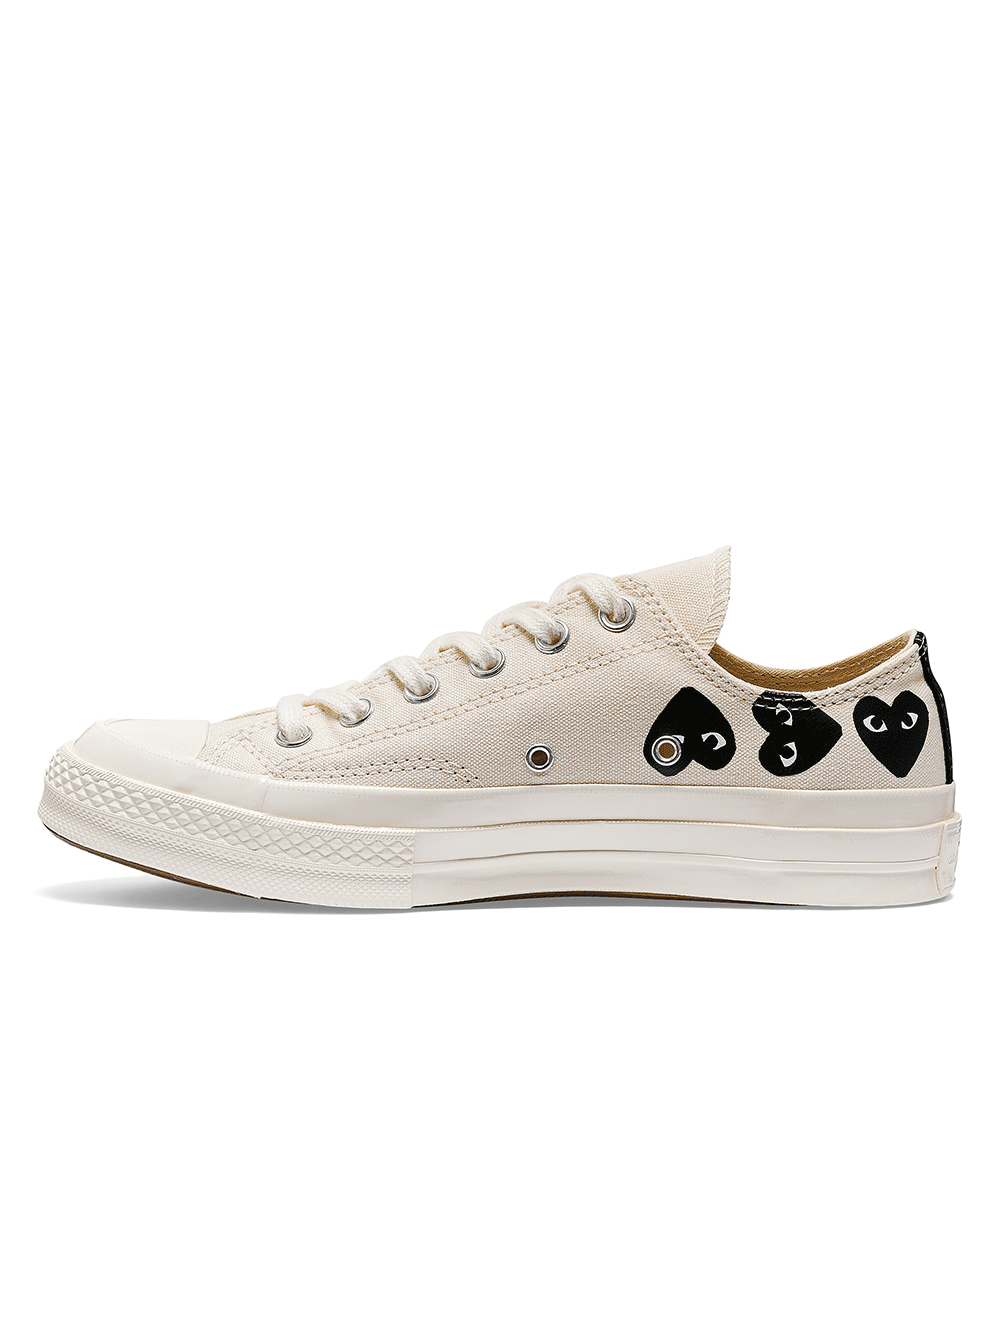 COMME-des-GARCONS-PLAY-CONVERSE-MULTI-HEART-Chuck-Taylor-All-Star-_70-Low-Sneakers-White-2